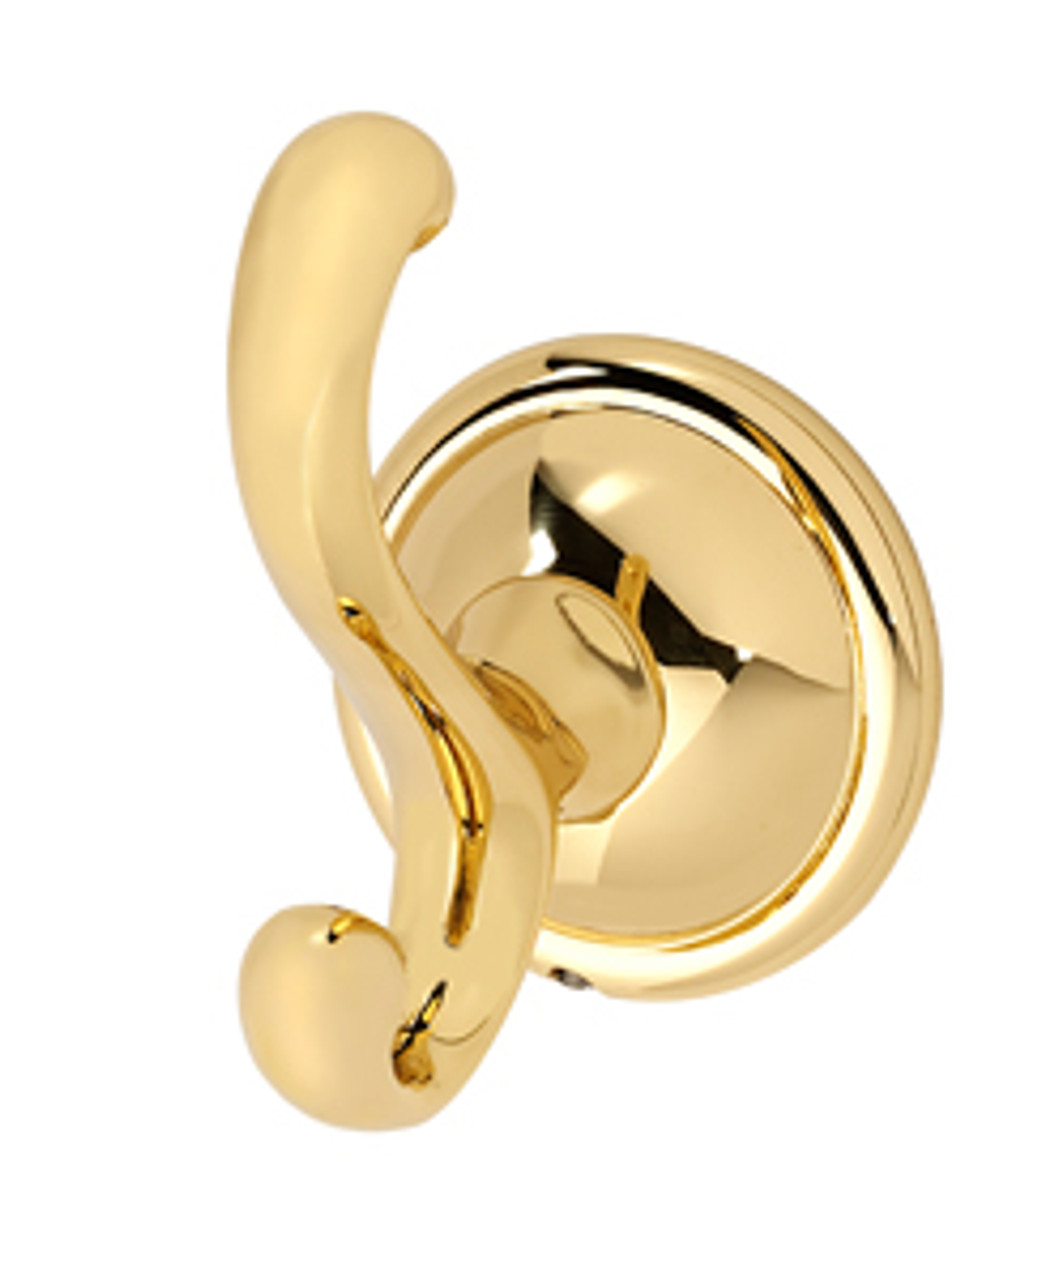 Arch Robe Hook A7599 – Creations by Alno, Inc.